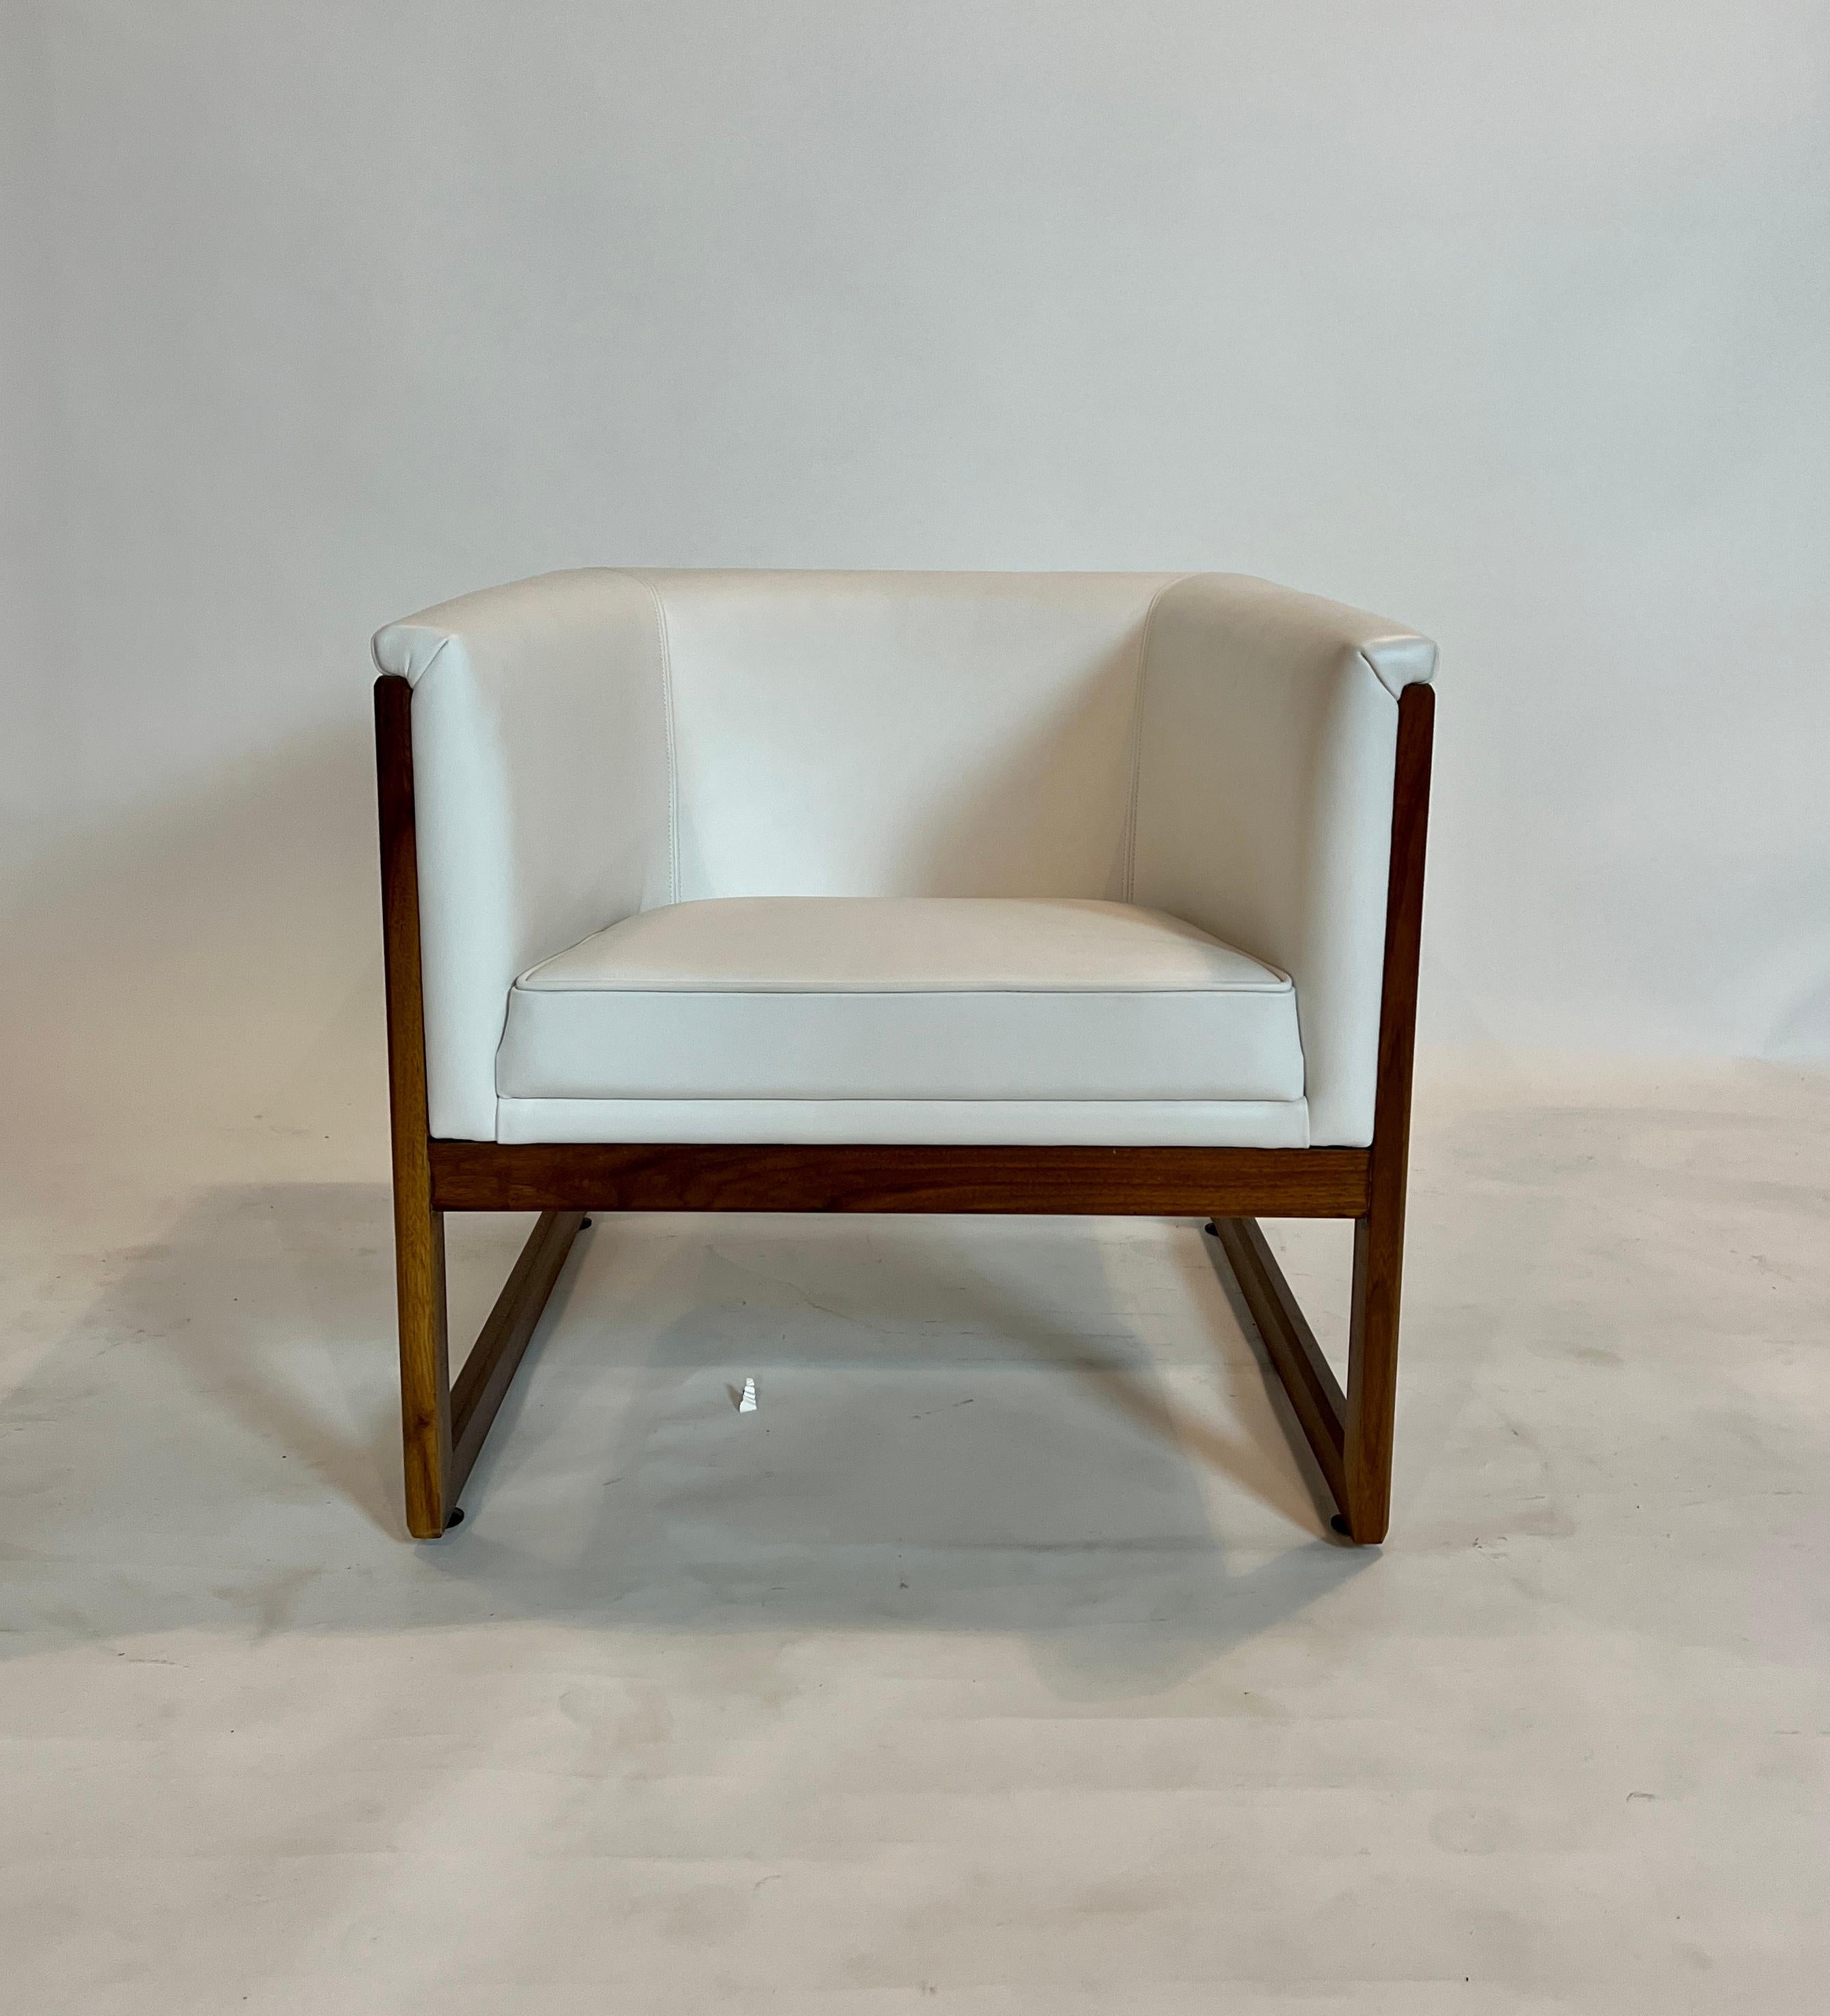 Mid-Century Modern walnut cubed lounge chair attributed to Milo Baughman completely restored frame and upholstered in white leather.